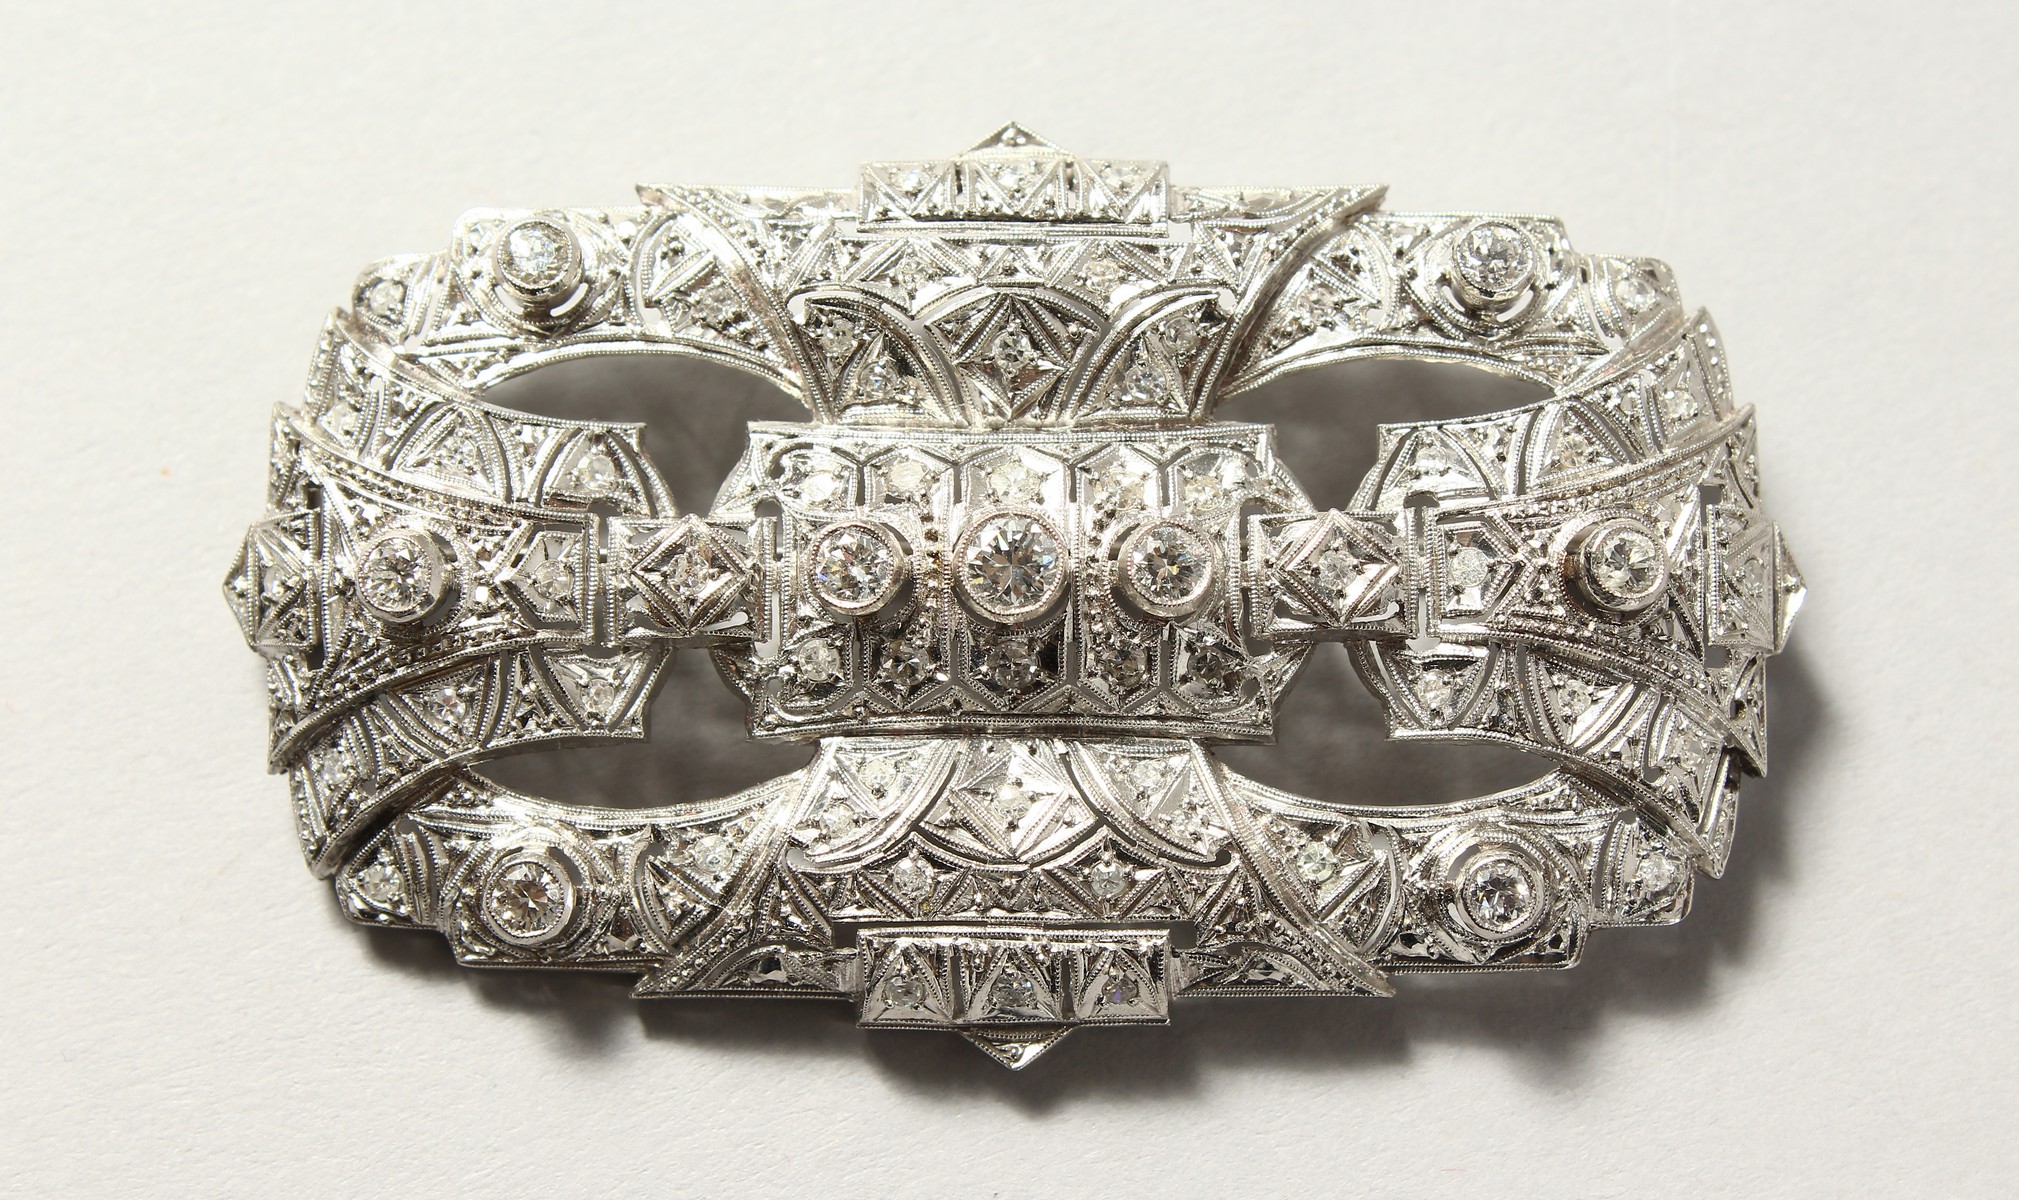 A SUPERB 18CT WHITE GOLD AND DIAMOND ART DECO BROOCH. 7cms long x 3.75cms wide.